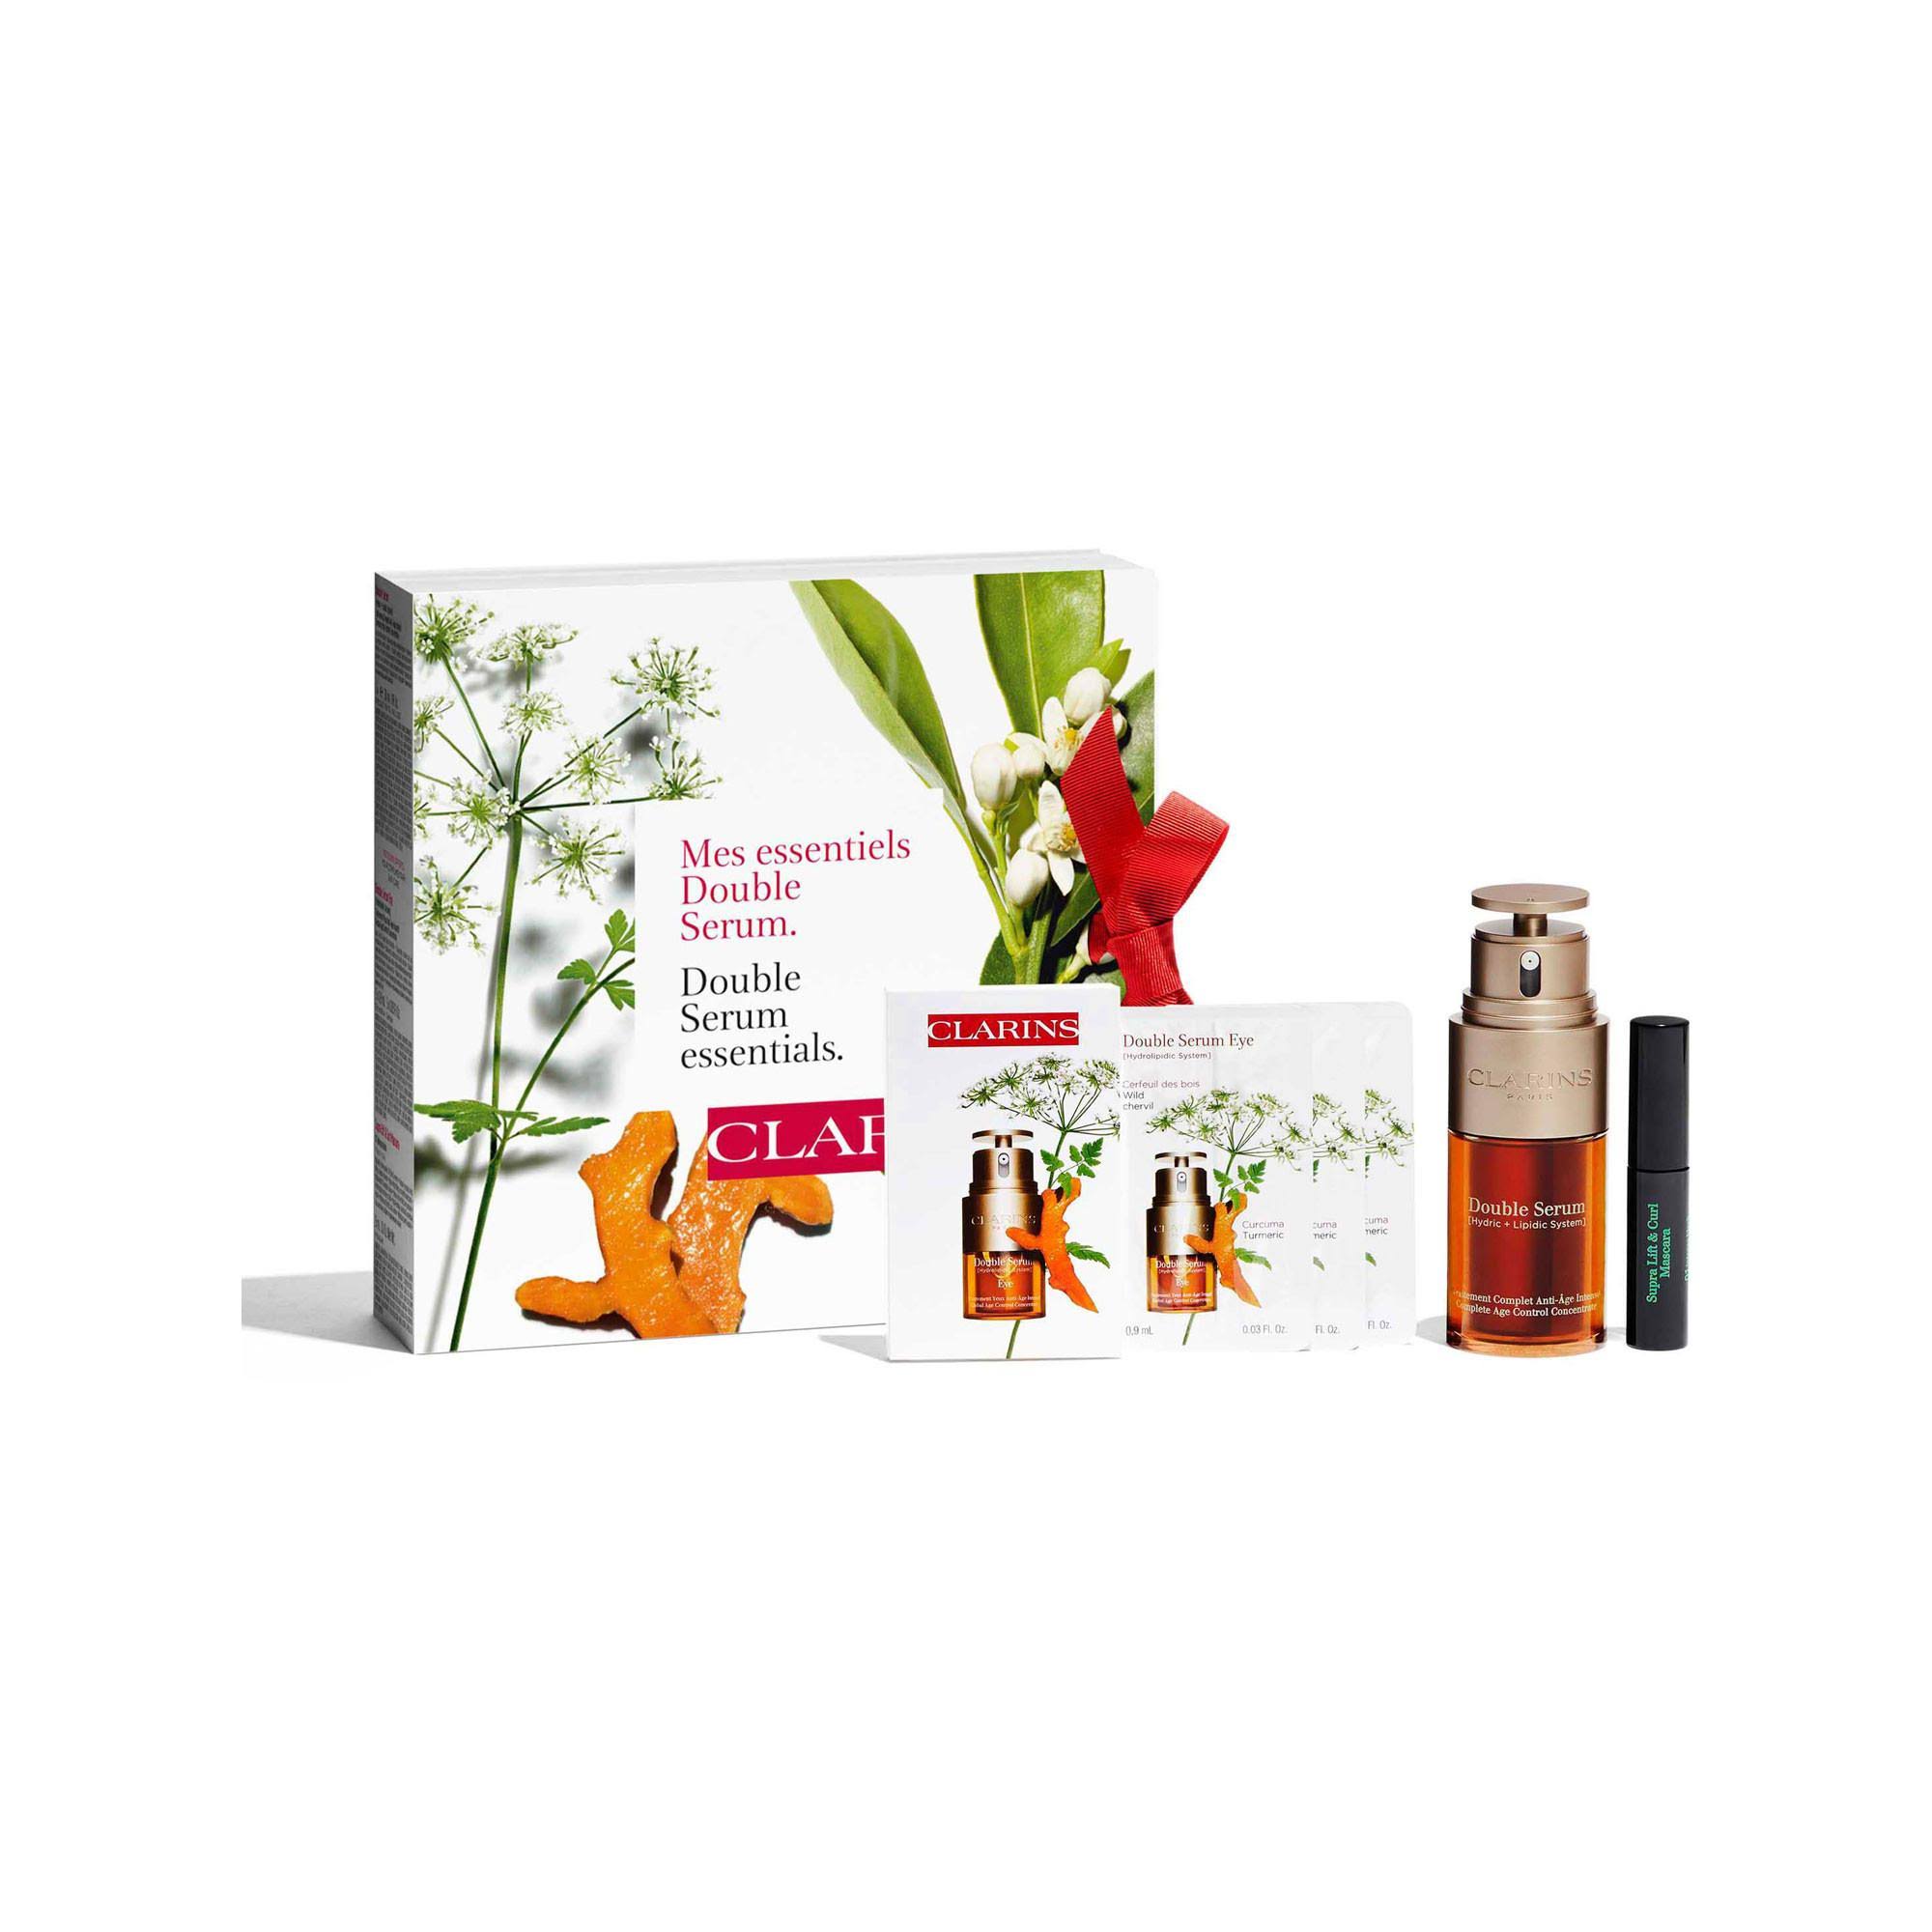 Clarins Double Serum and Nutri-Lumière Set | 4-Piece, Limited-Edition Double Serum Gift Set with Nutrient-Rich Formulas for Visibly Revitalized,